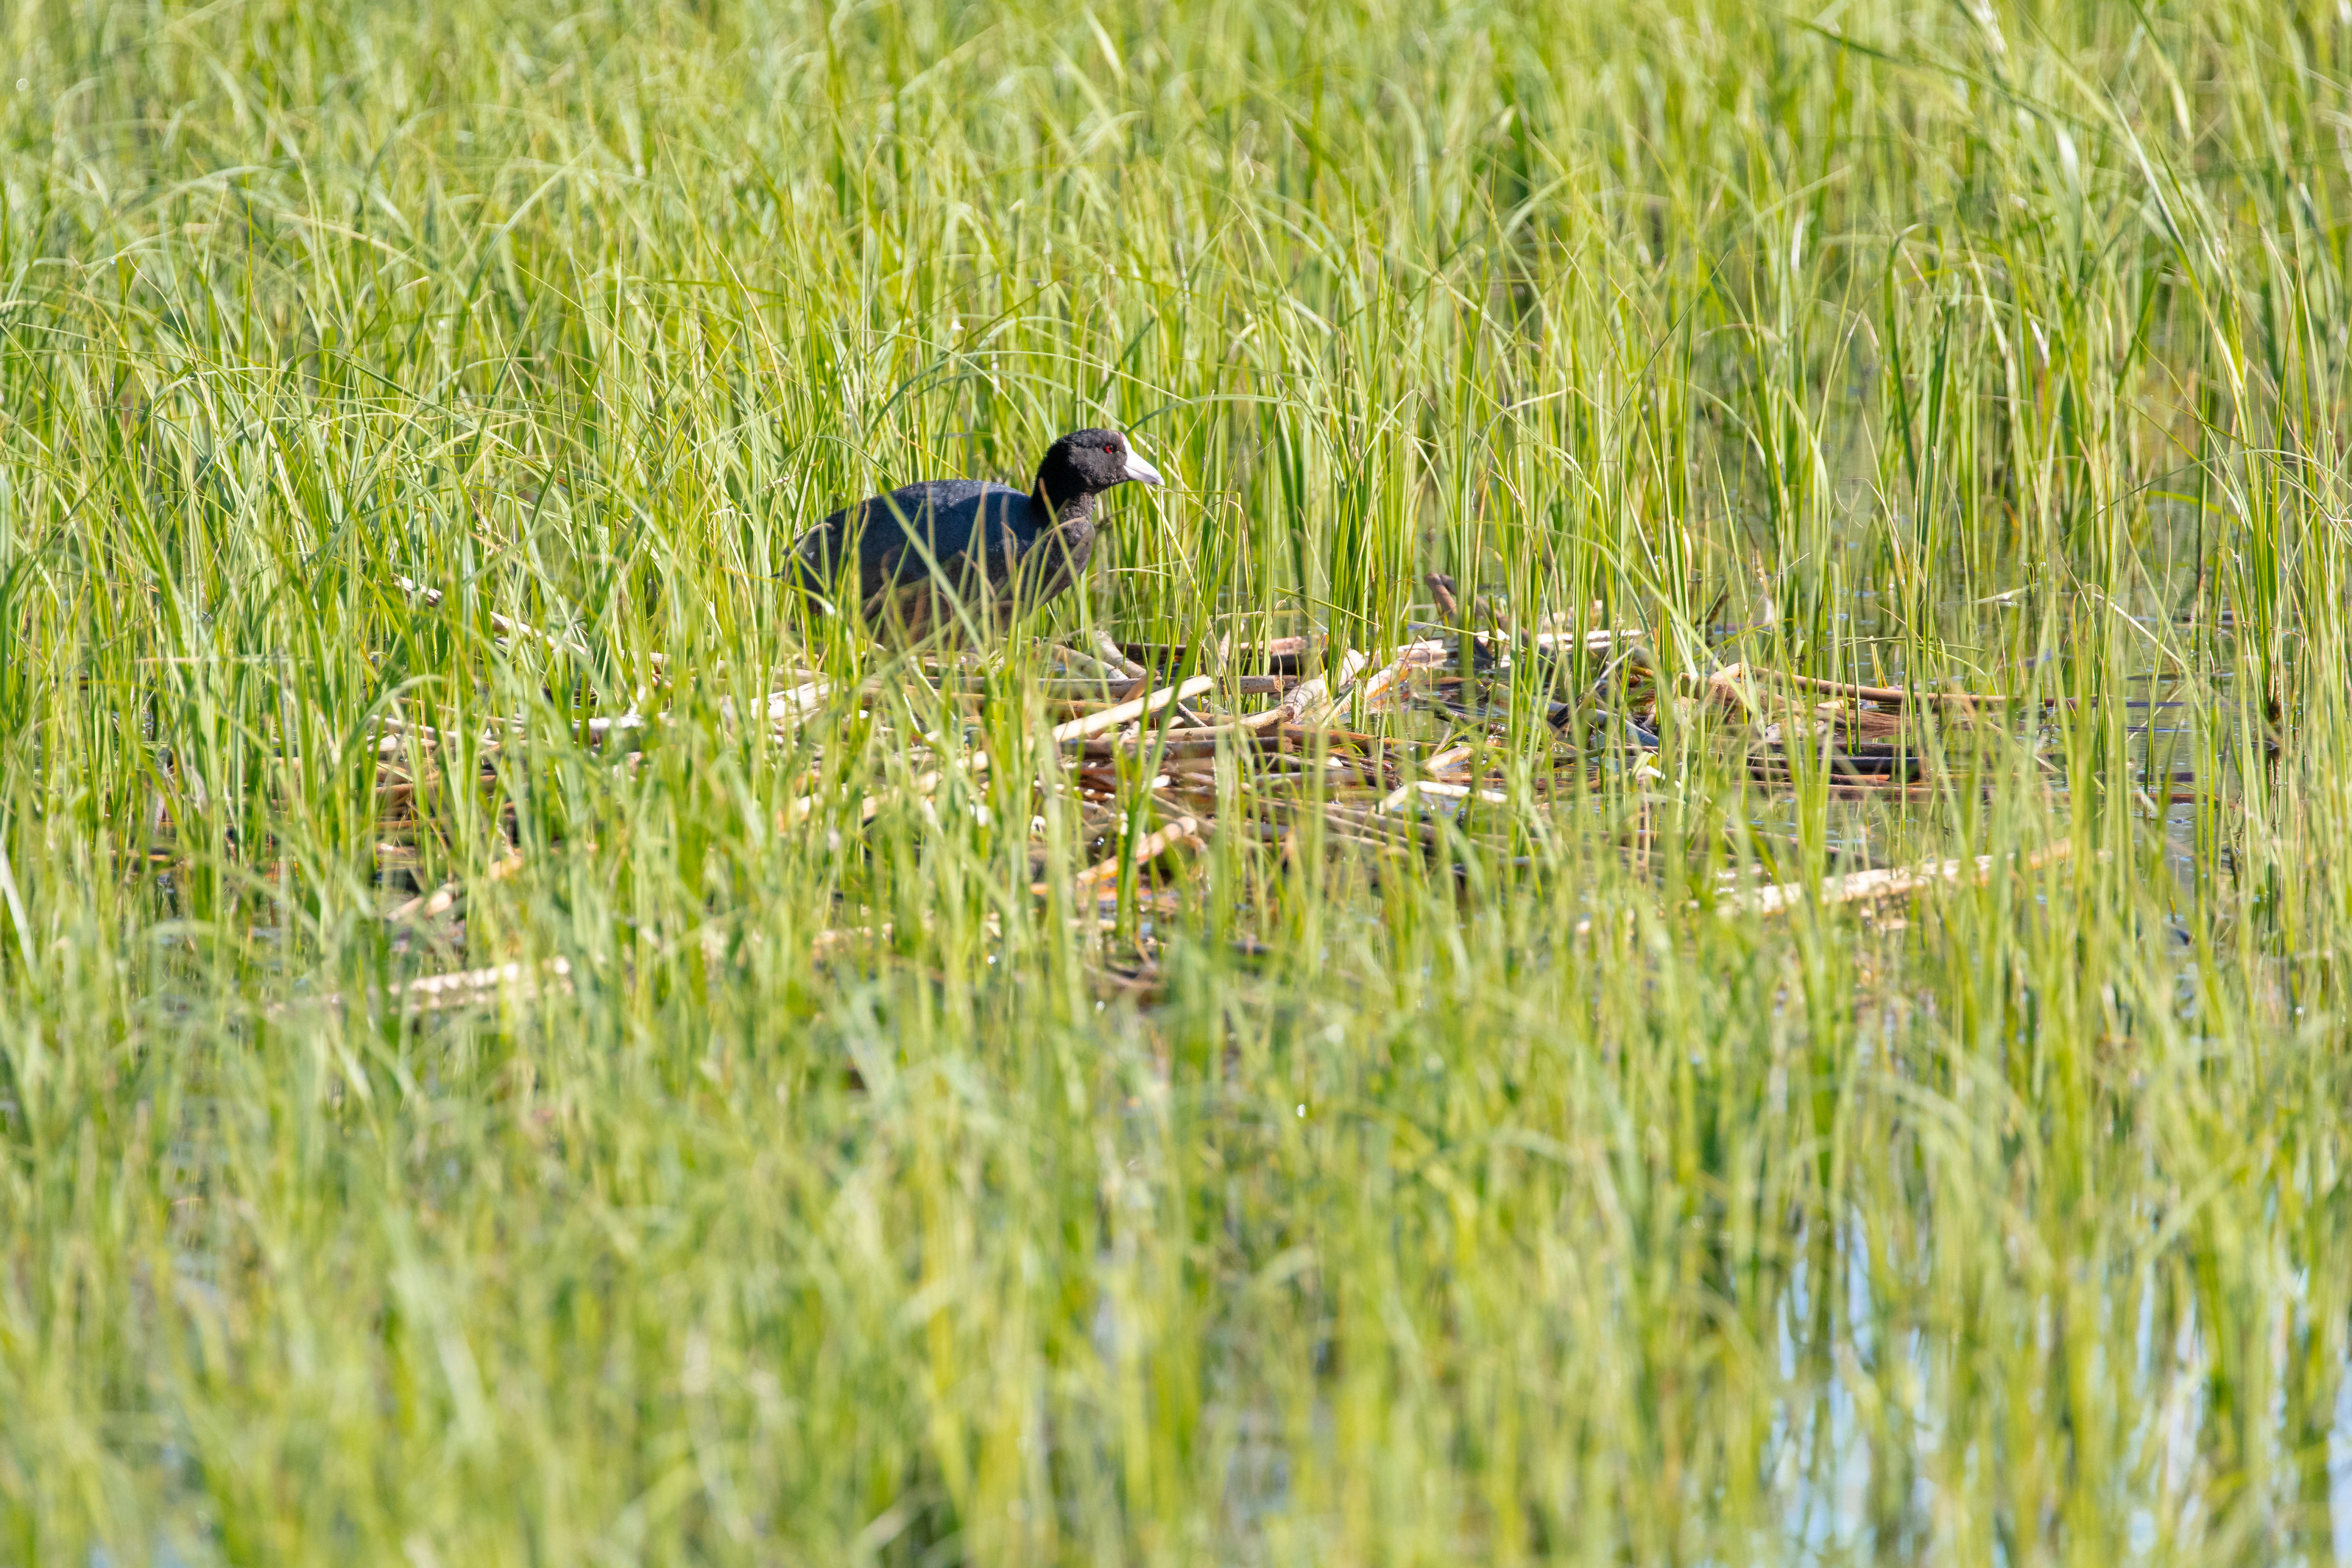 A coot stand on reeds in a pond.